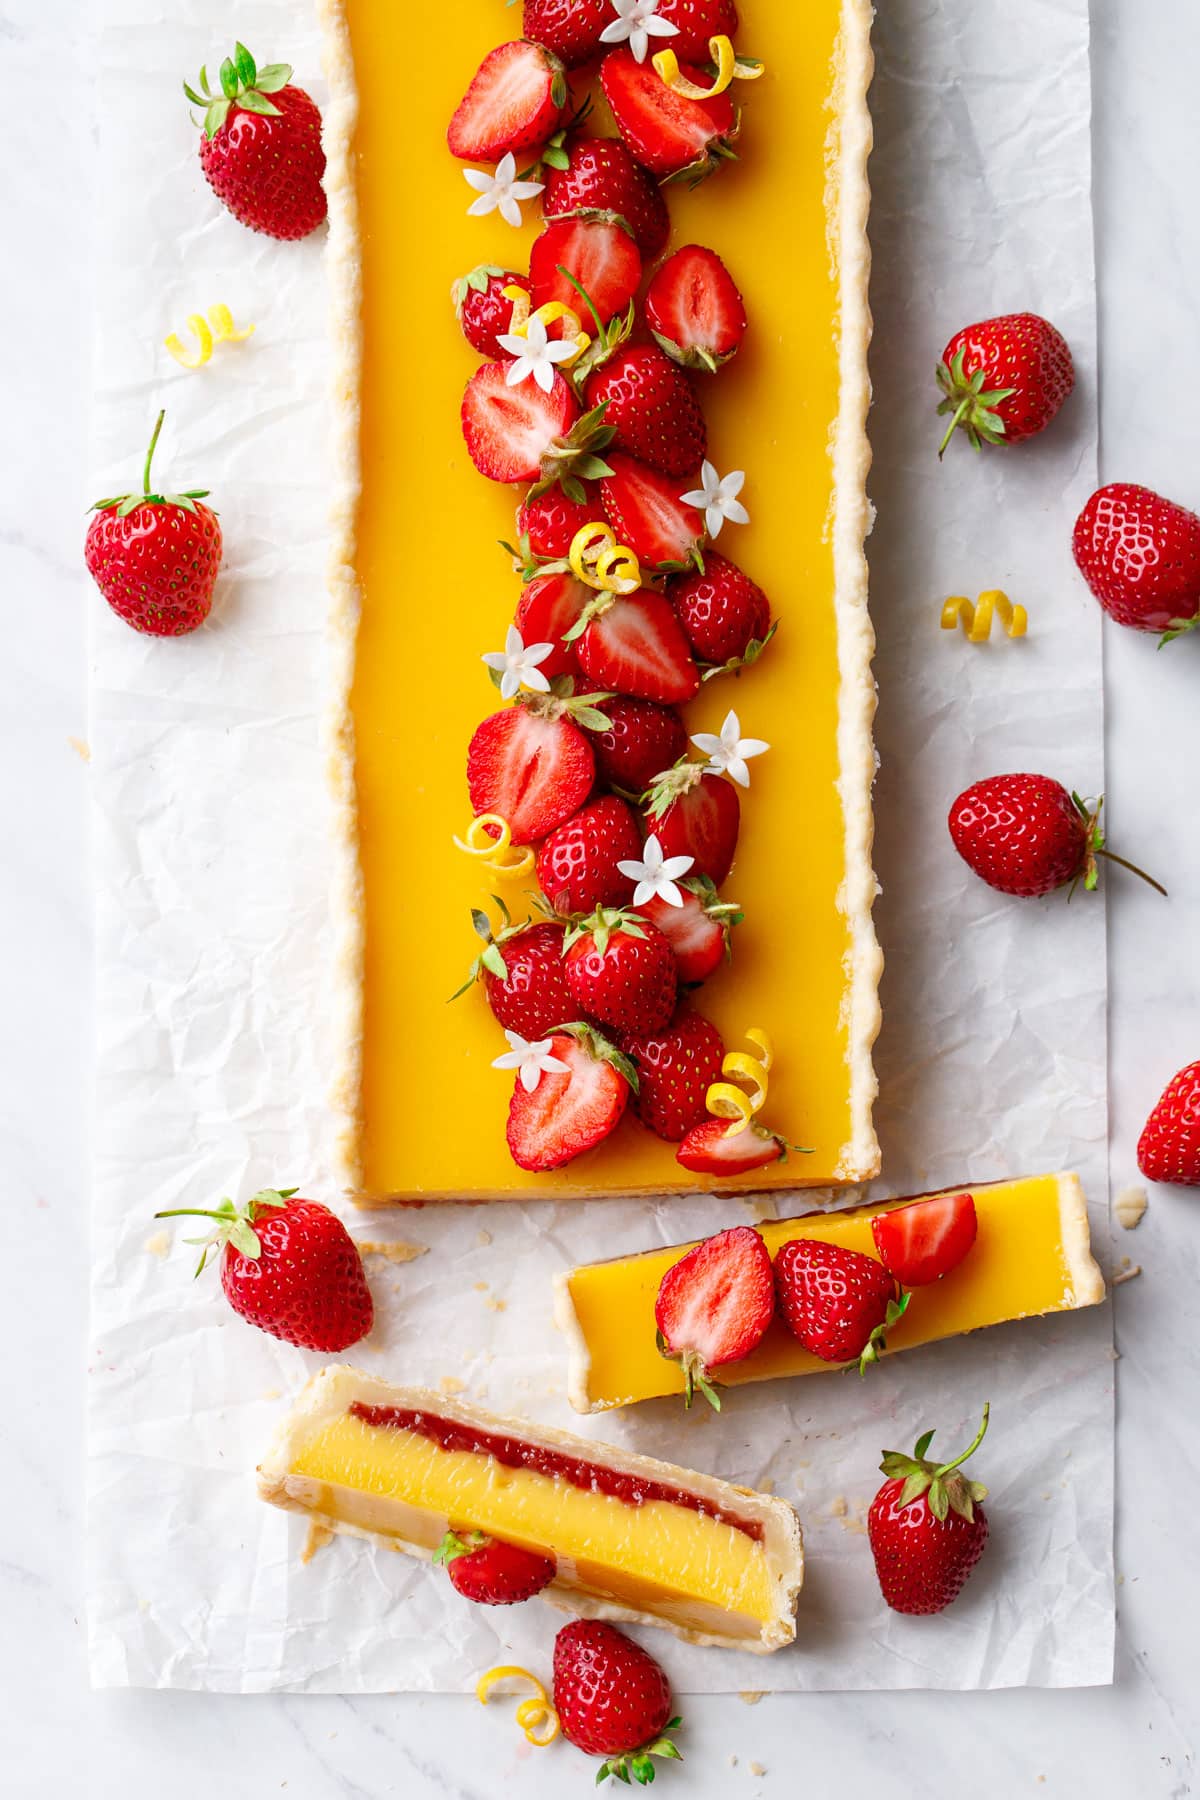 Overhead, rectangular Strawberry Meyer Lemon Tart with slices cut to show the cross section of layers.